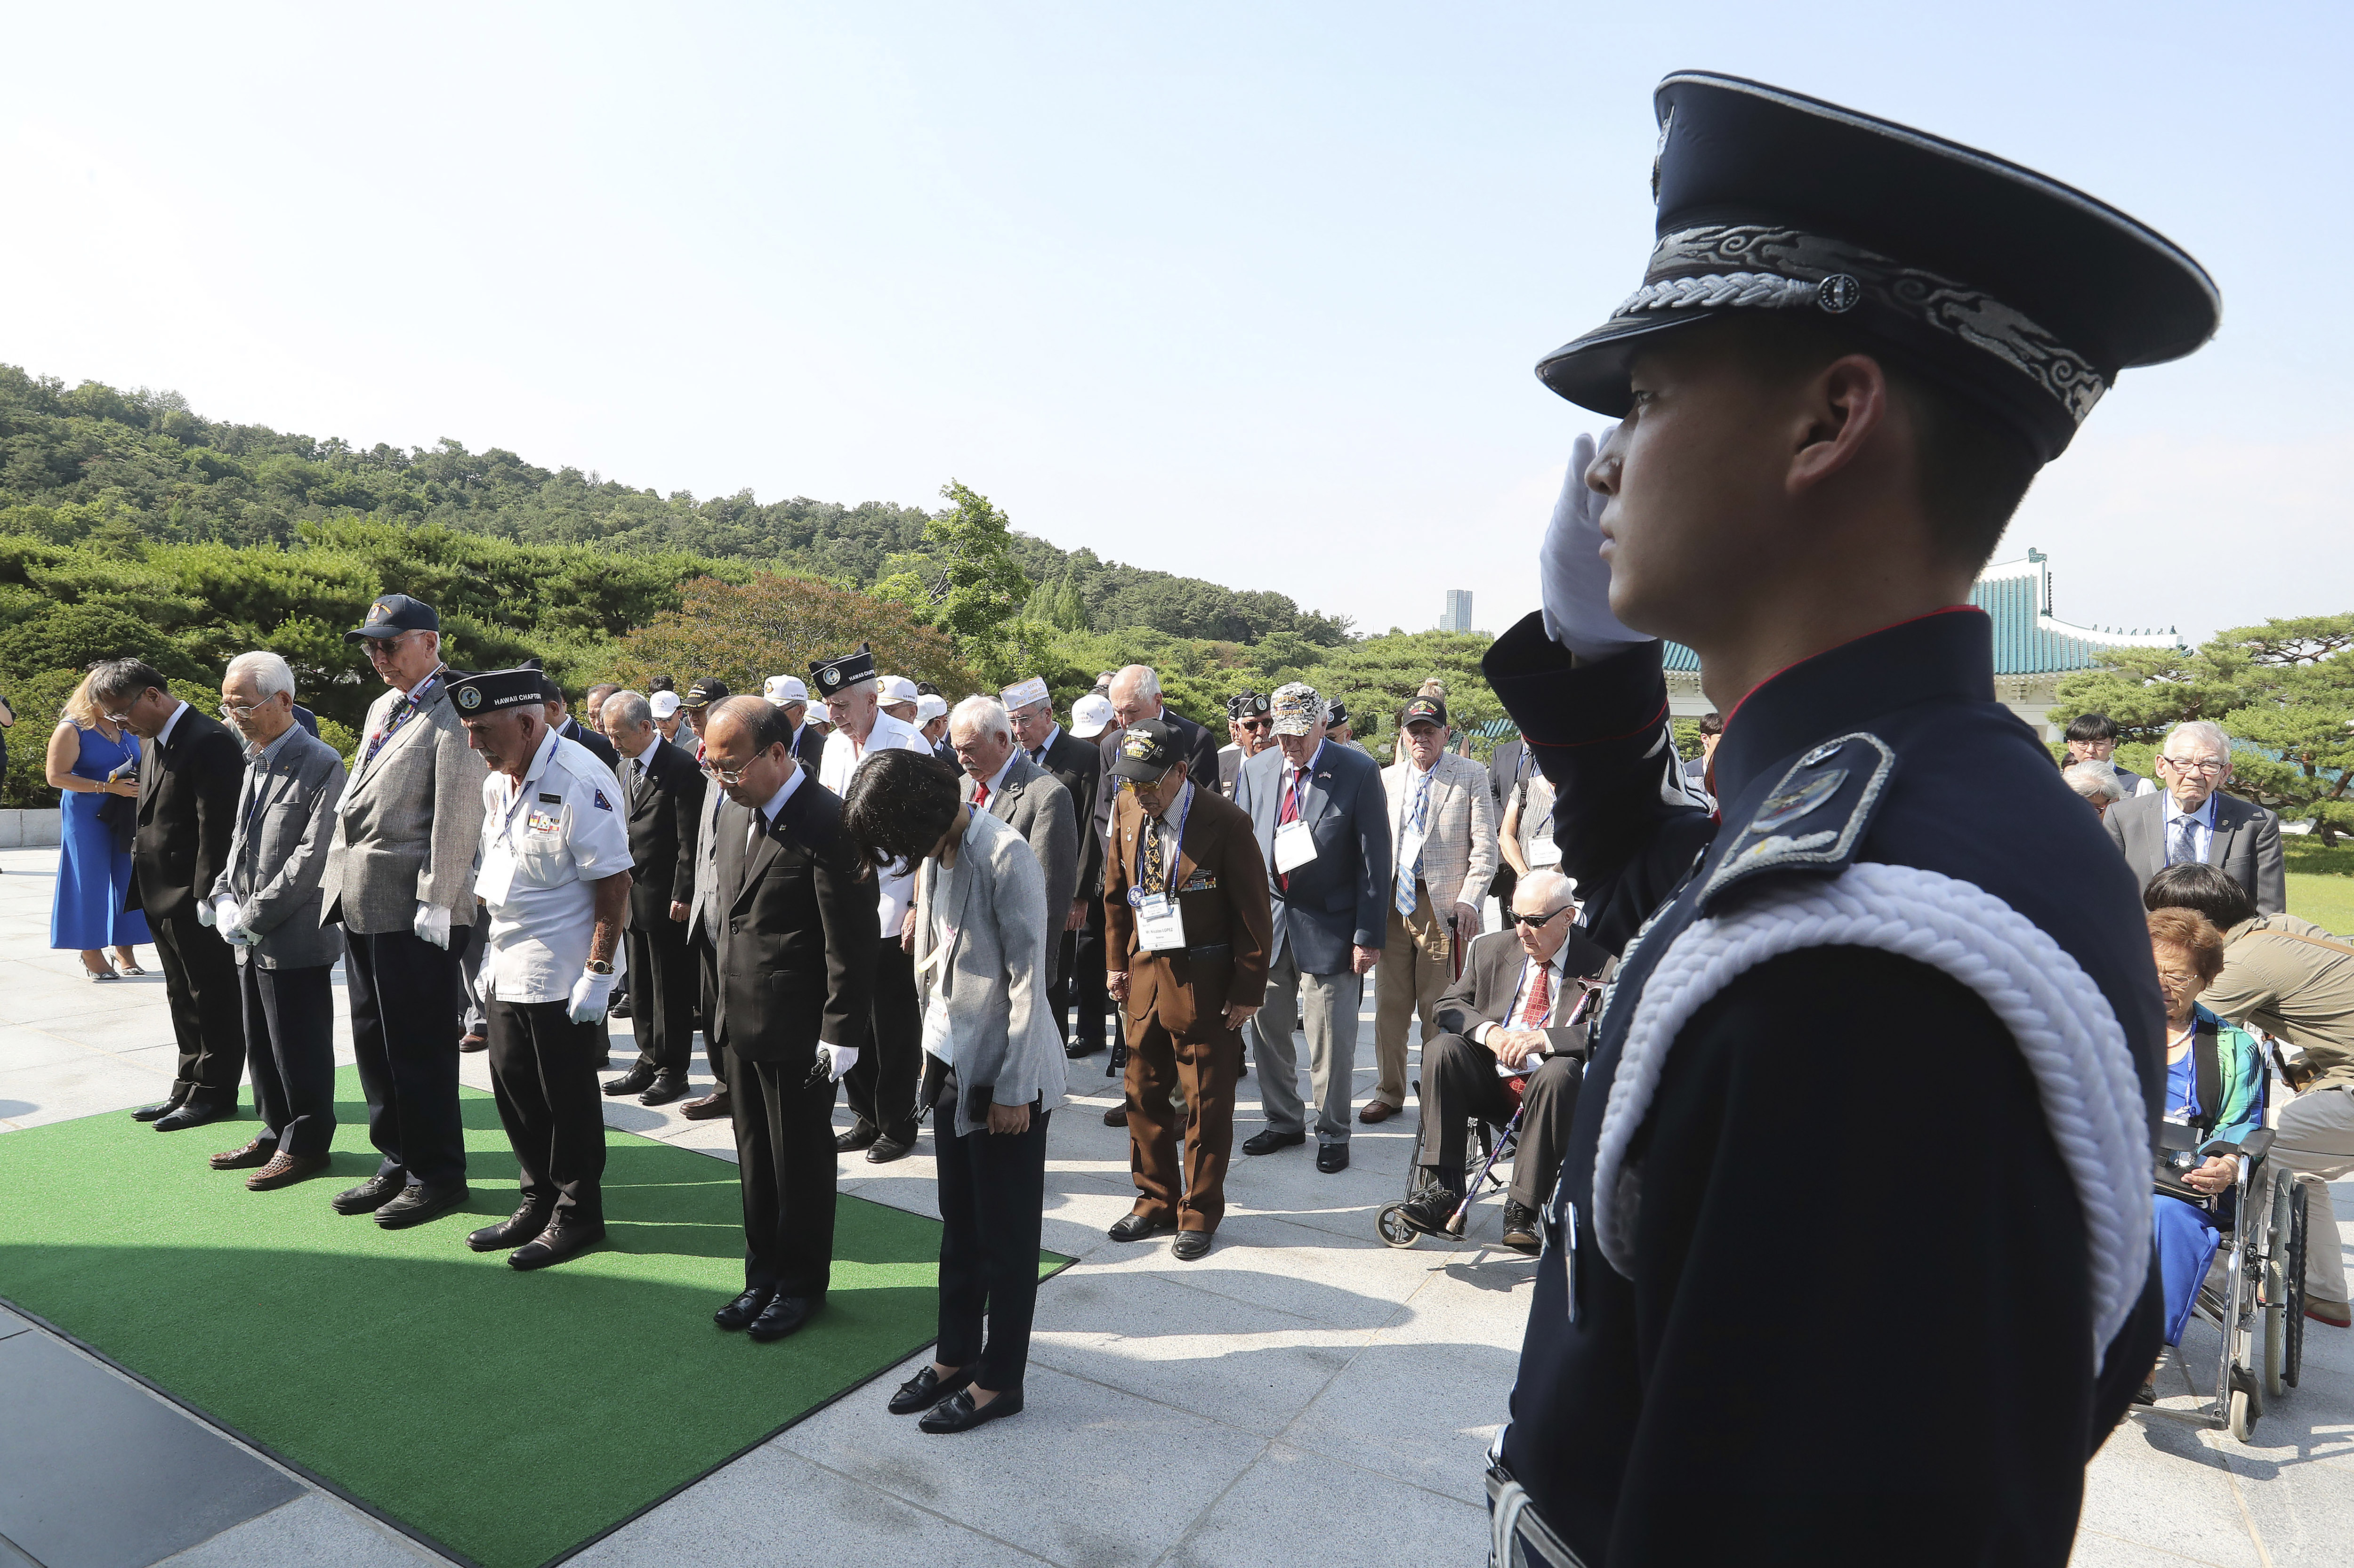 South Korean and U.S. veterans of the Korean War pay their respects to the war dead on the eve of the 69th anniversary of the outbreak of the Korean War at the National Cemetery in Seoul, South Korea, Monday, June 24, 2019. 62 U.S. war veterans and their families, along with 20 Korean veterans and their families residing overseas, arrived on Sunday, June 23, for a six-day visit to mark the anniversary. (AP Photo/Ahn Young-joon)